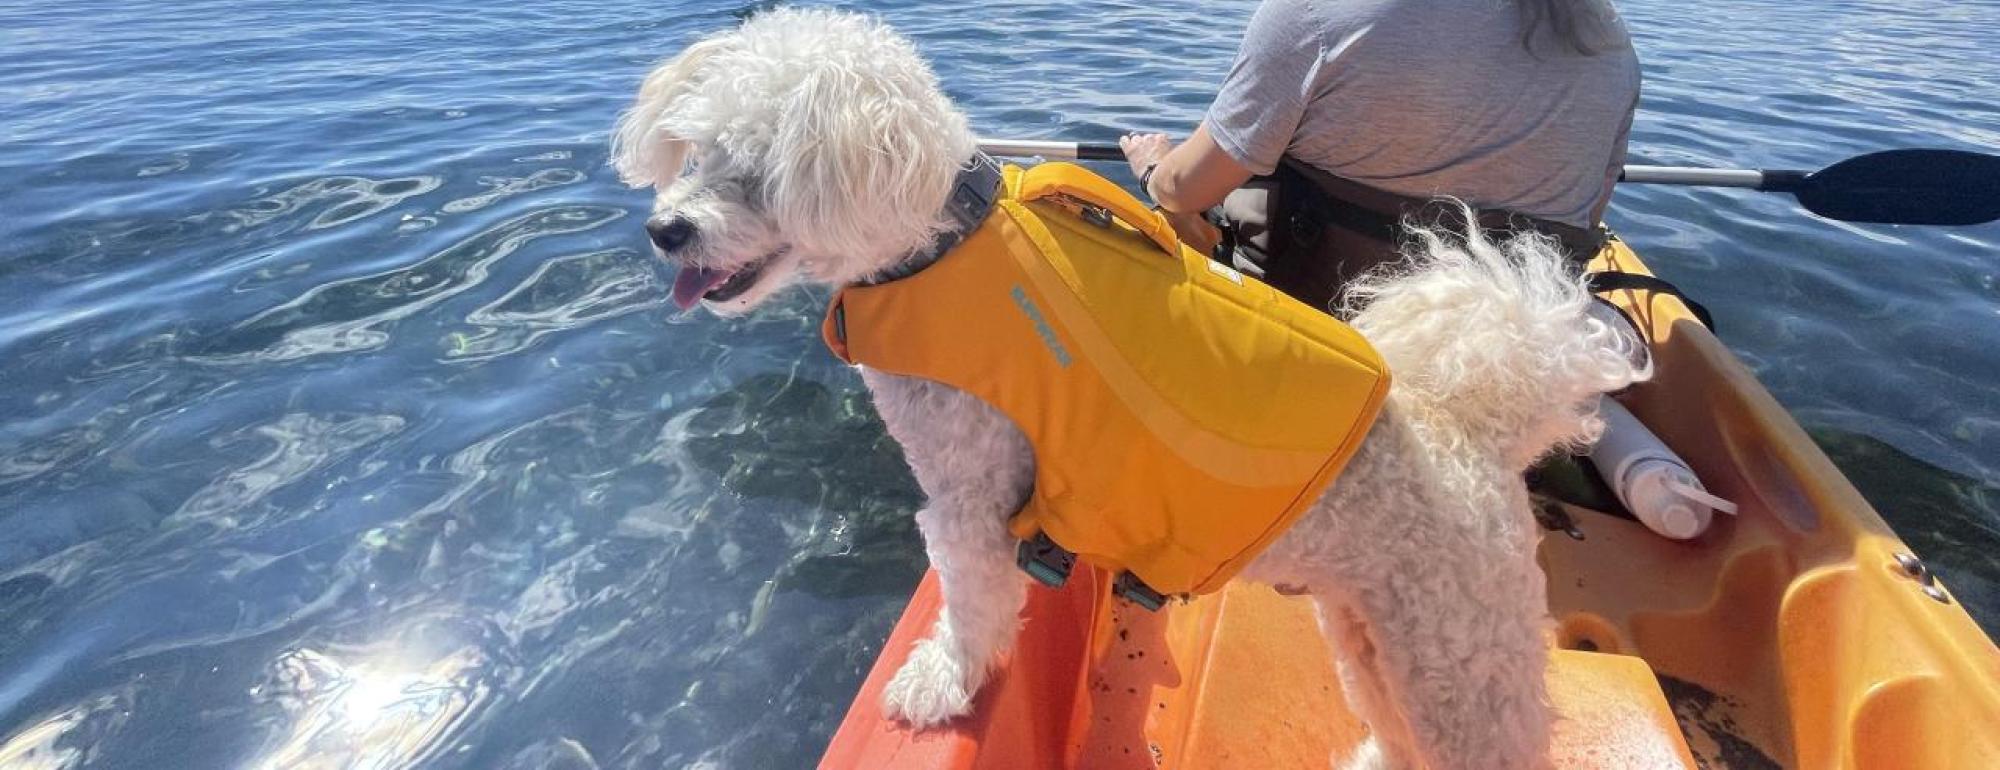 Noodle doggie in a kayak